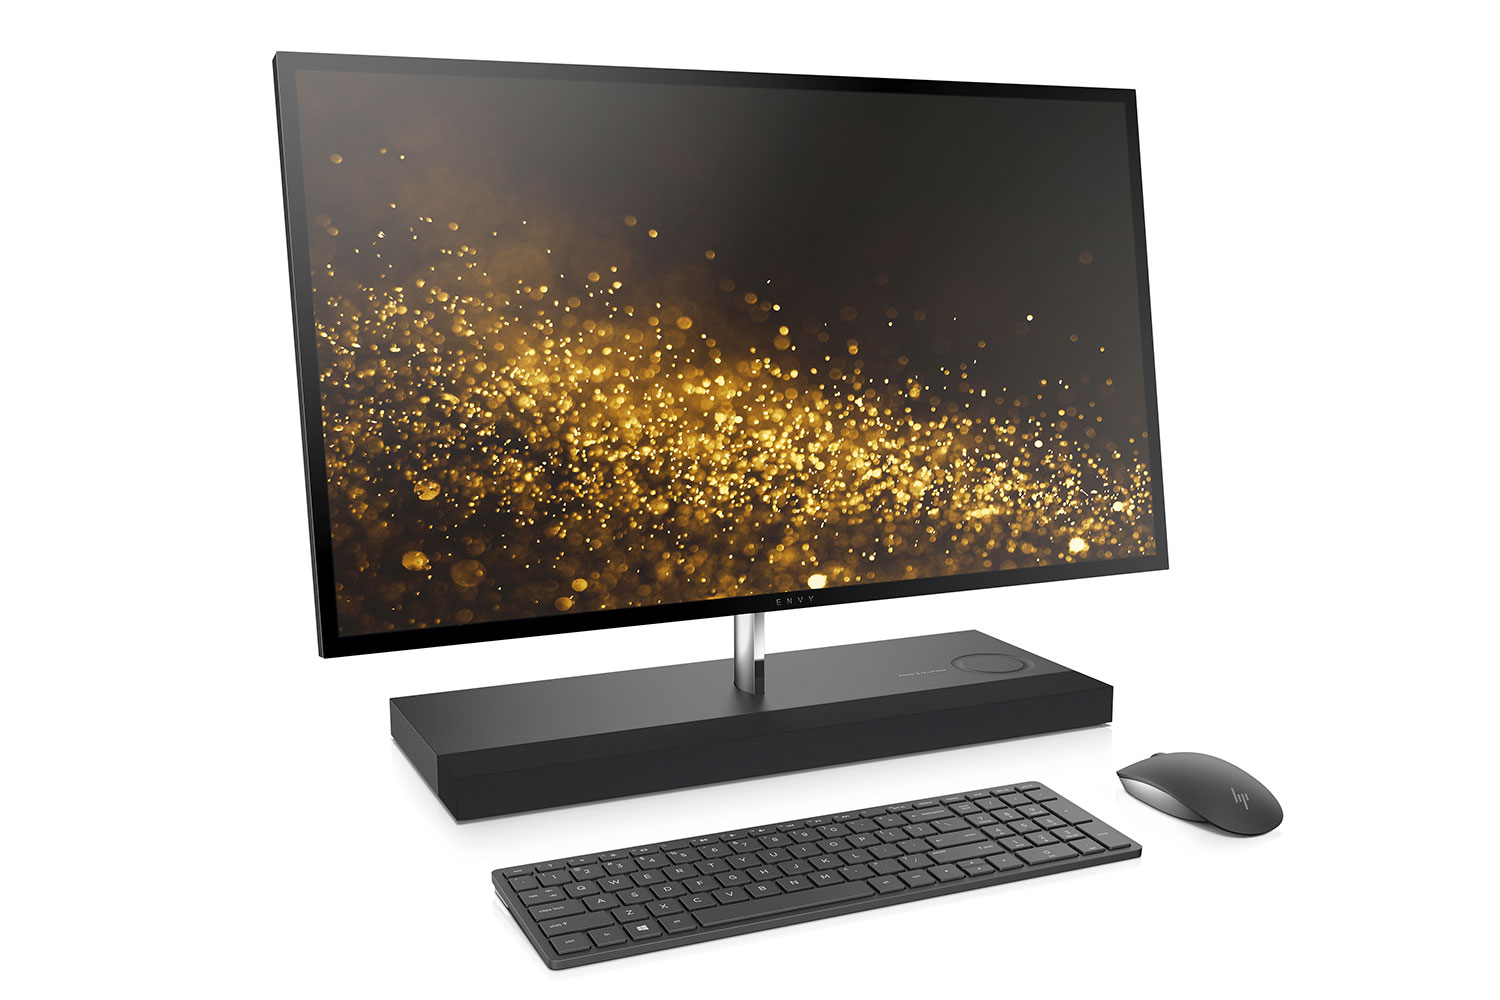 HP Envy All-in-one 27